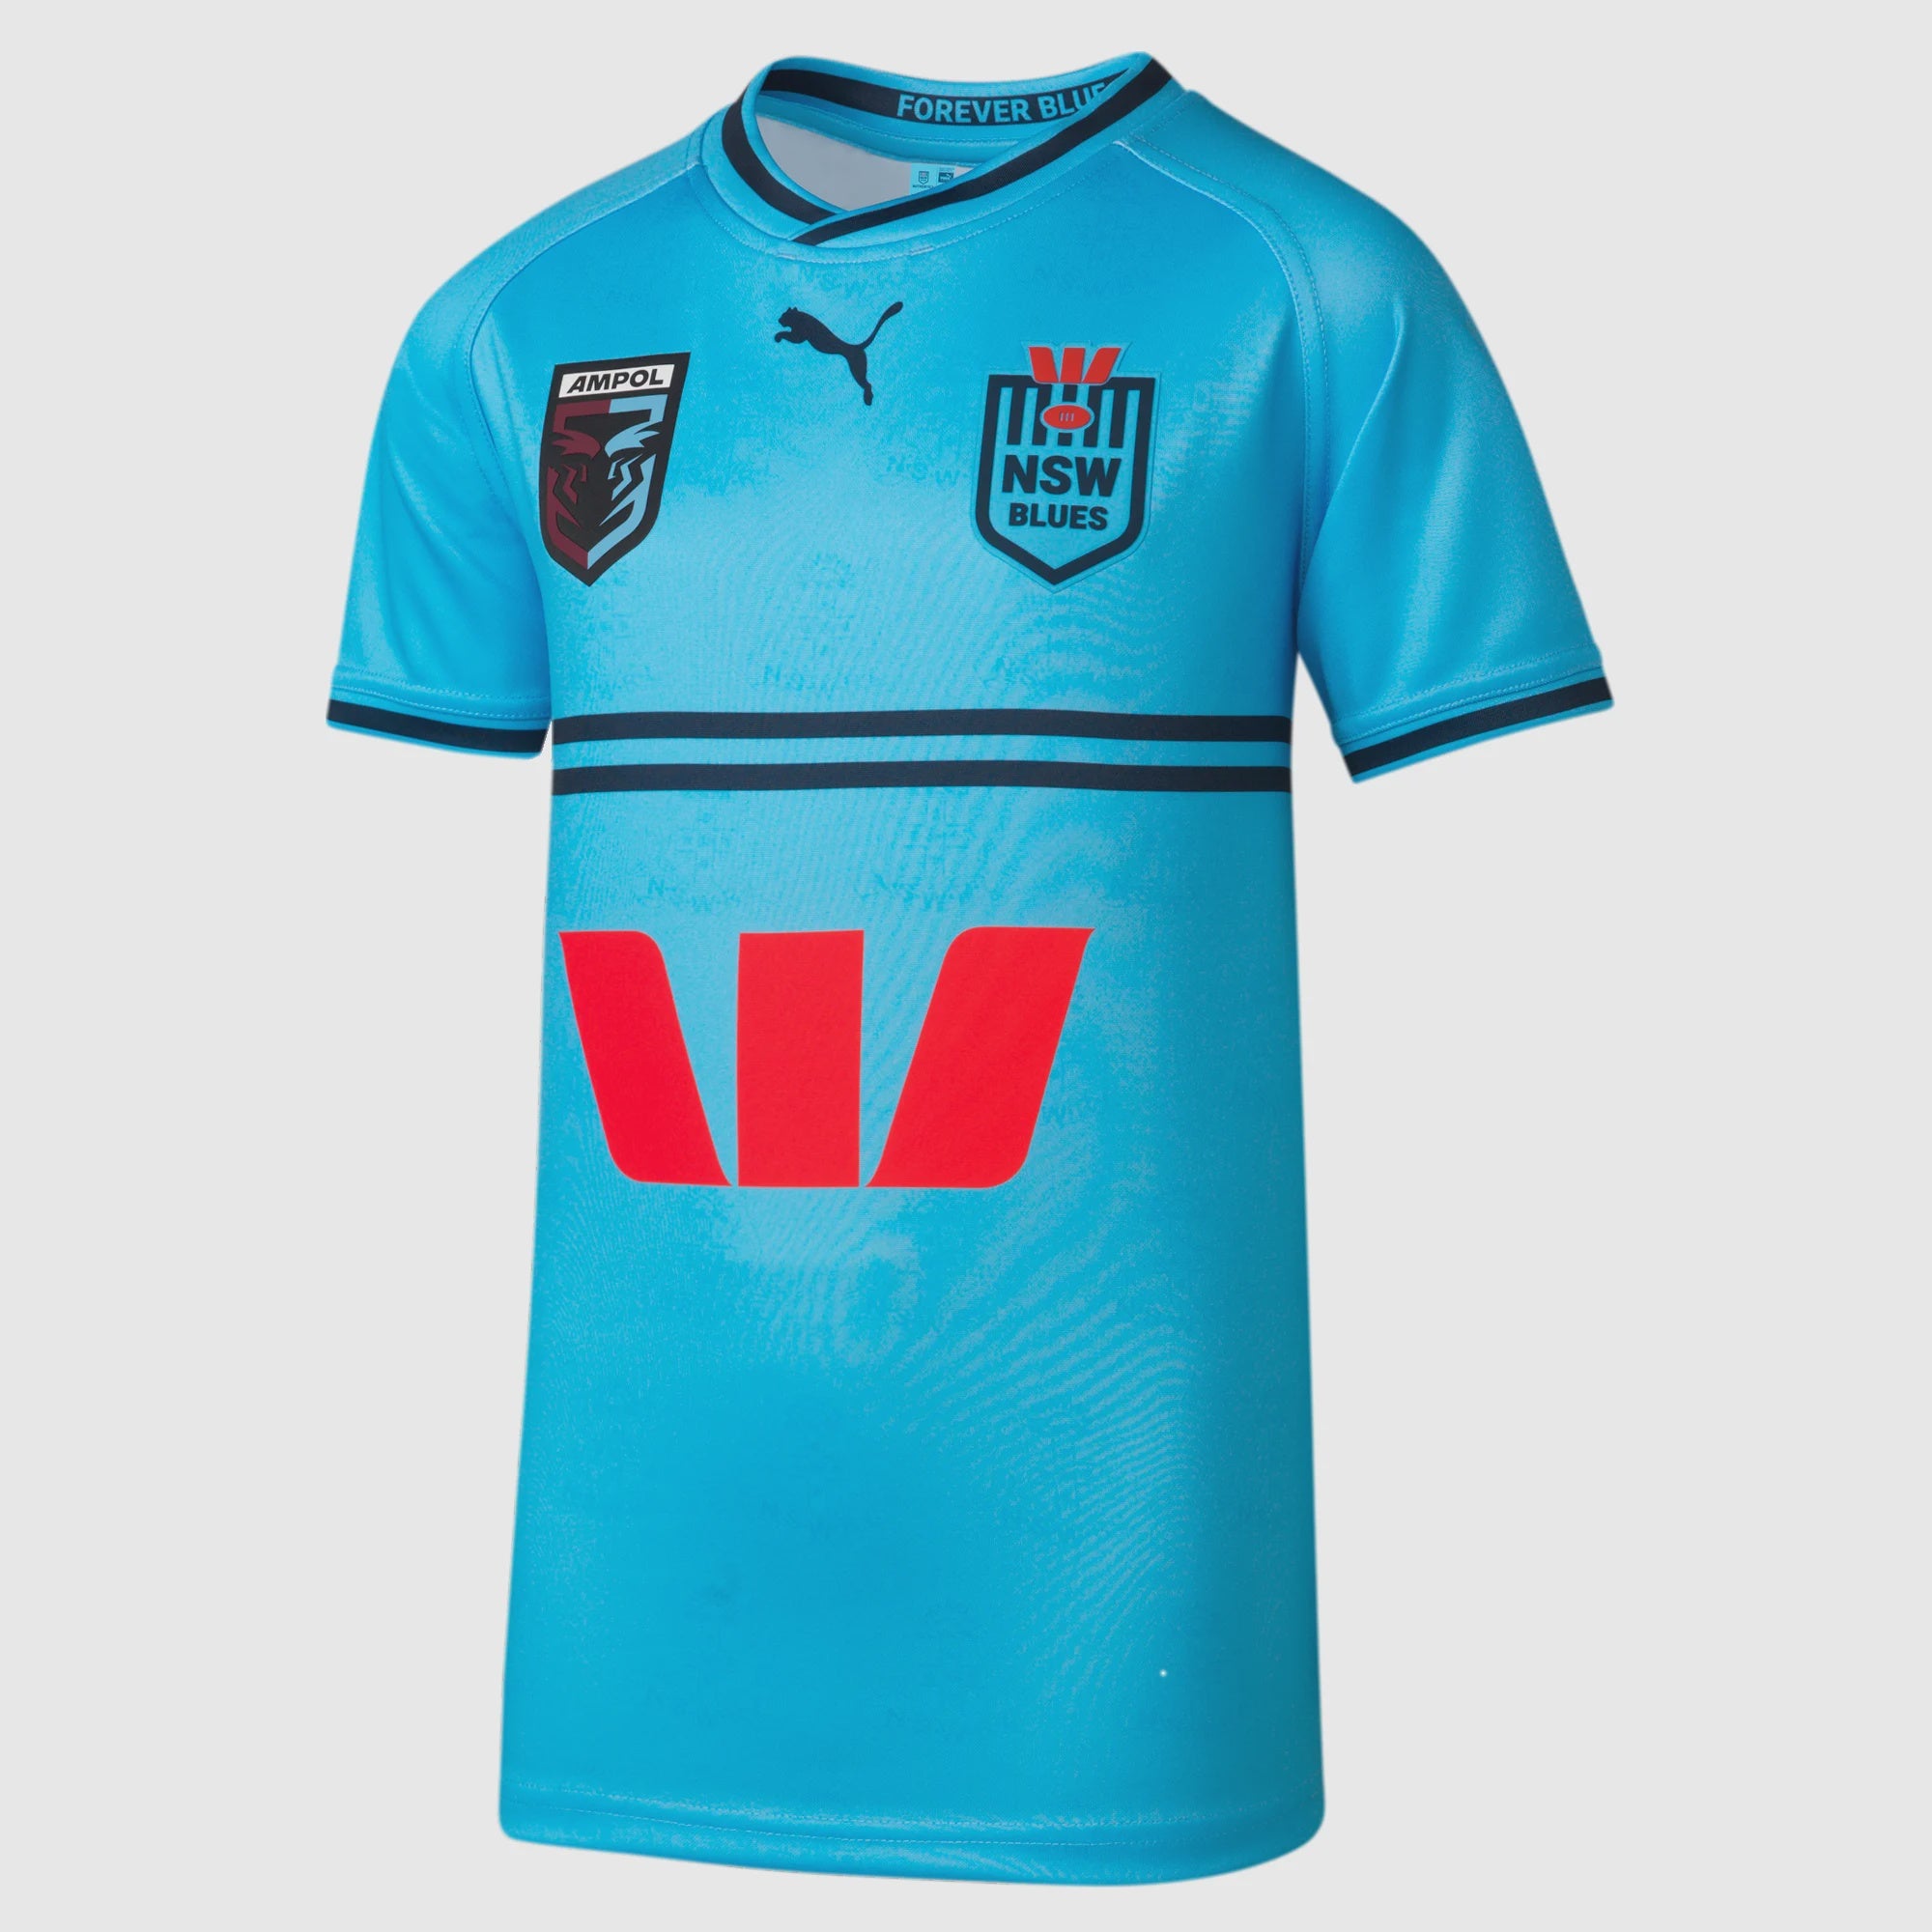 SOO NSW Youth Jersey 23 - The Rugby Shop Darwin